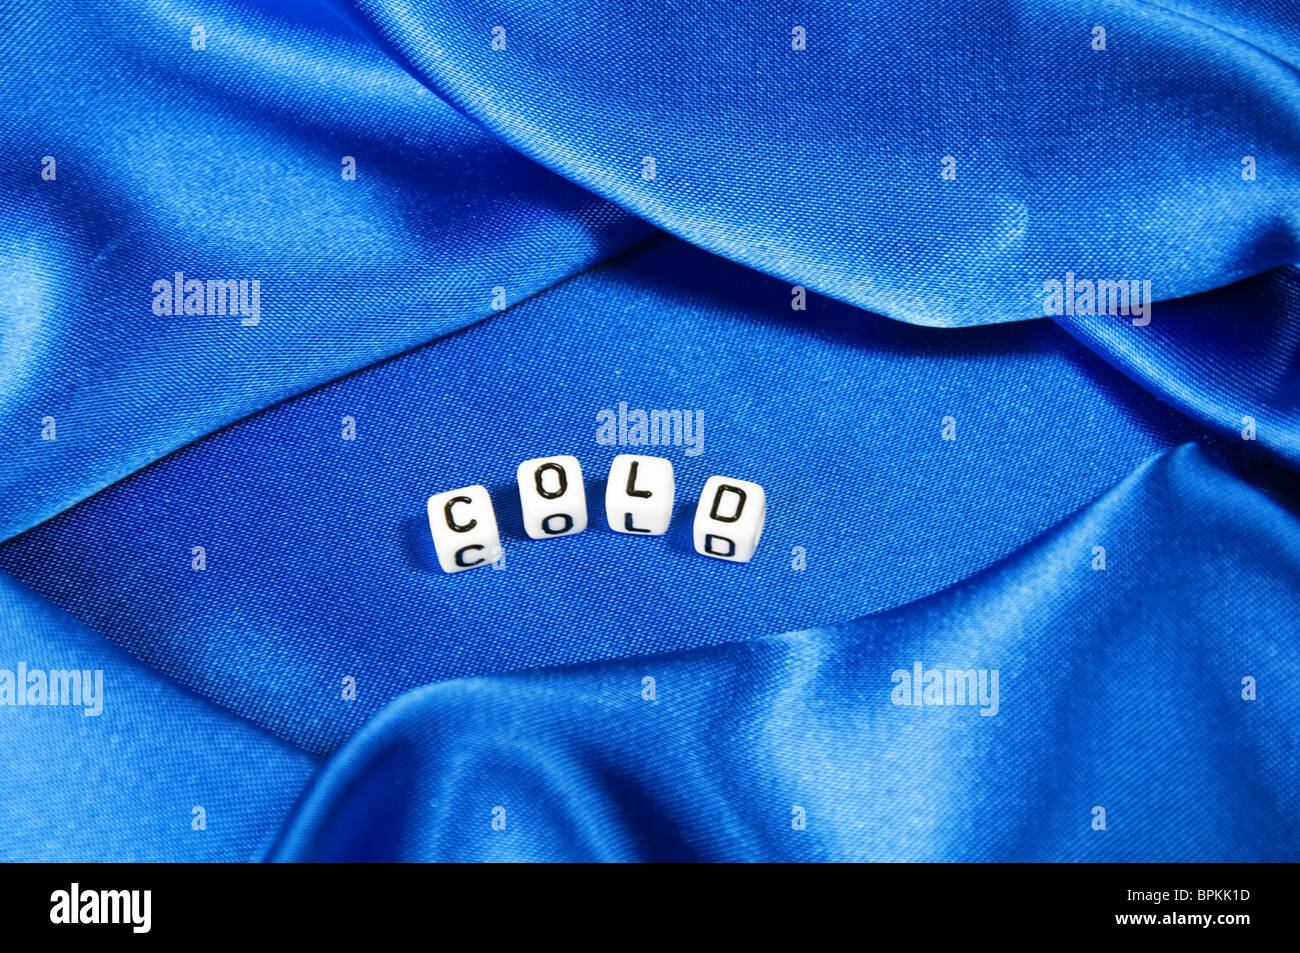 Royal blue satin background with rich folds and wrinkles for texture is the word cold in black and white cube lettering series. Stock Photo